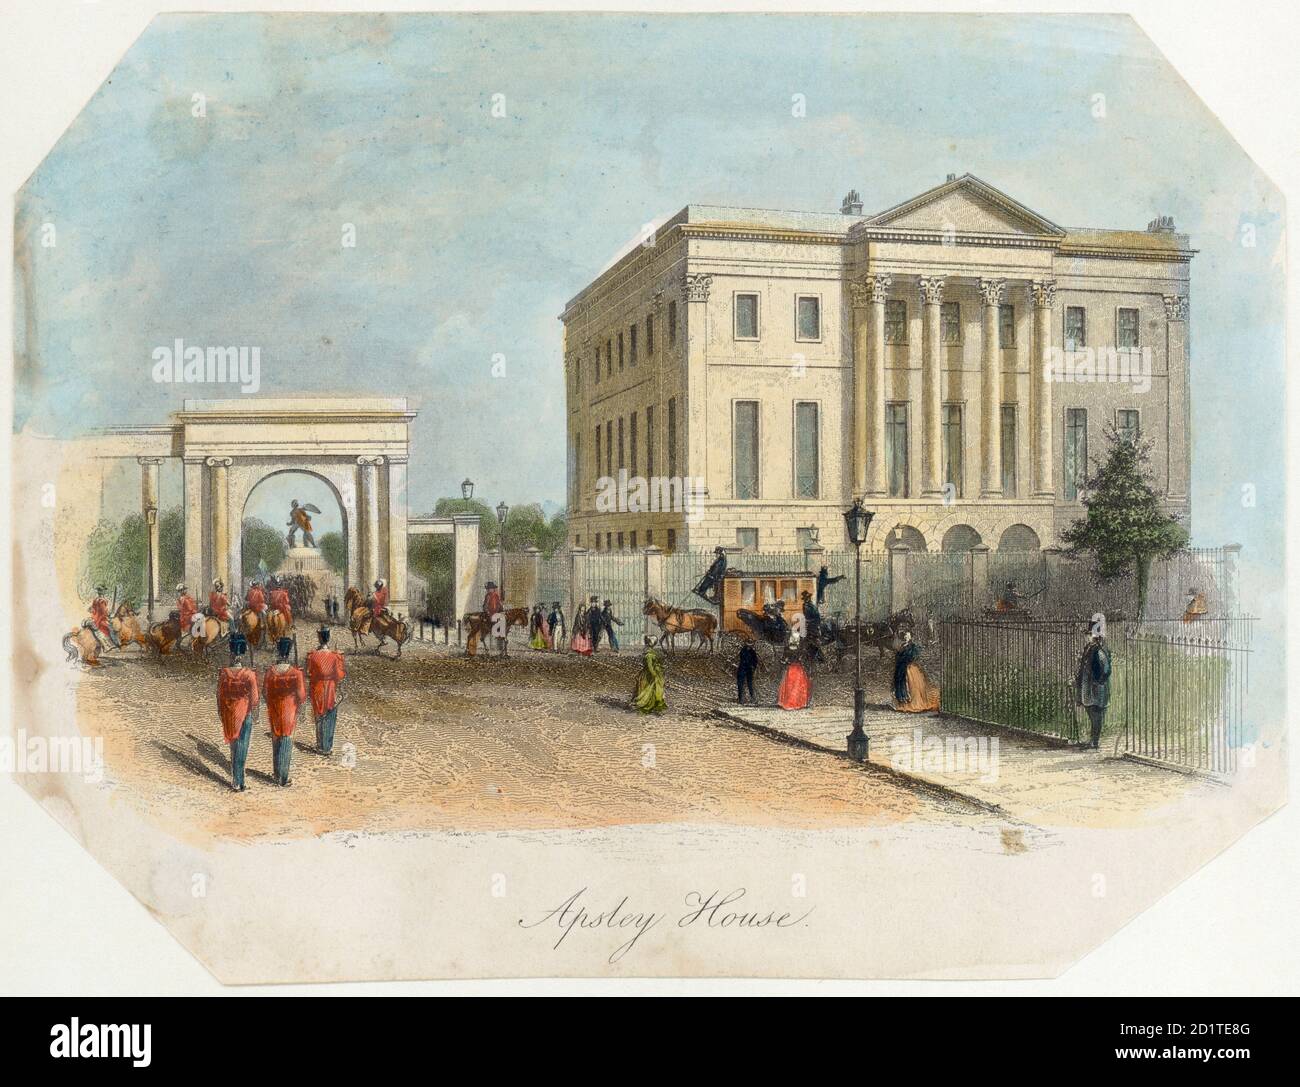 APSLEY HOUSE, Piccadilly, Hyde Park Corner, London. 'Apsley House'. Line coloured engraving dated 1850. Originally built by Robert Adam in 1771-8, by 1830 Apsley house had been enlarged and remodelled by Benjamin Dean Wyatt to be the Duke of Wellington's main London residence. The adjacent Hyde Park Screen was built between 1822-25 by Decimus Burton. MAYSON BEETON COLLECTION Stock Photo